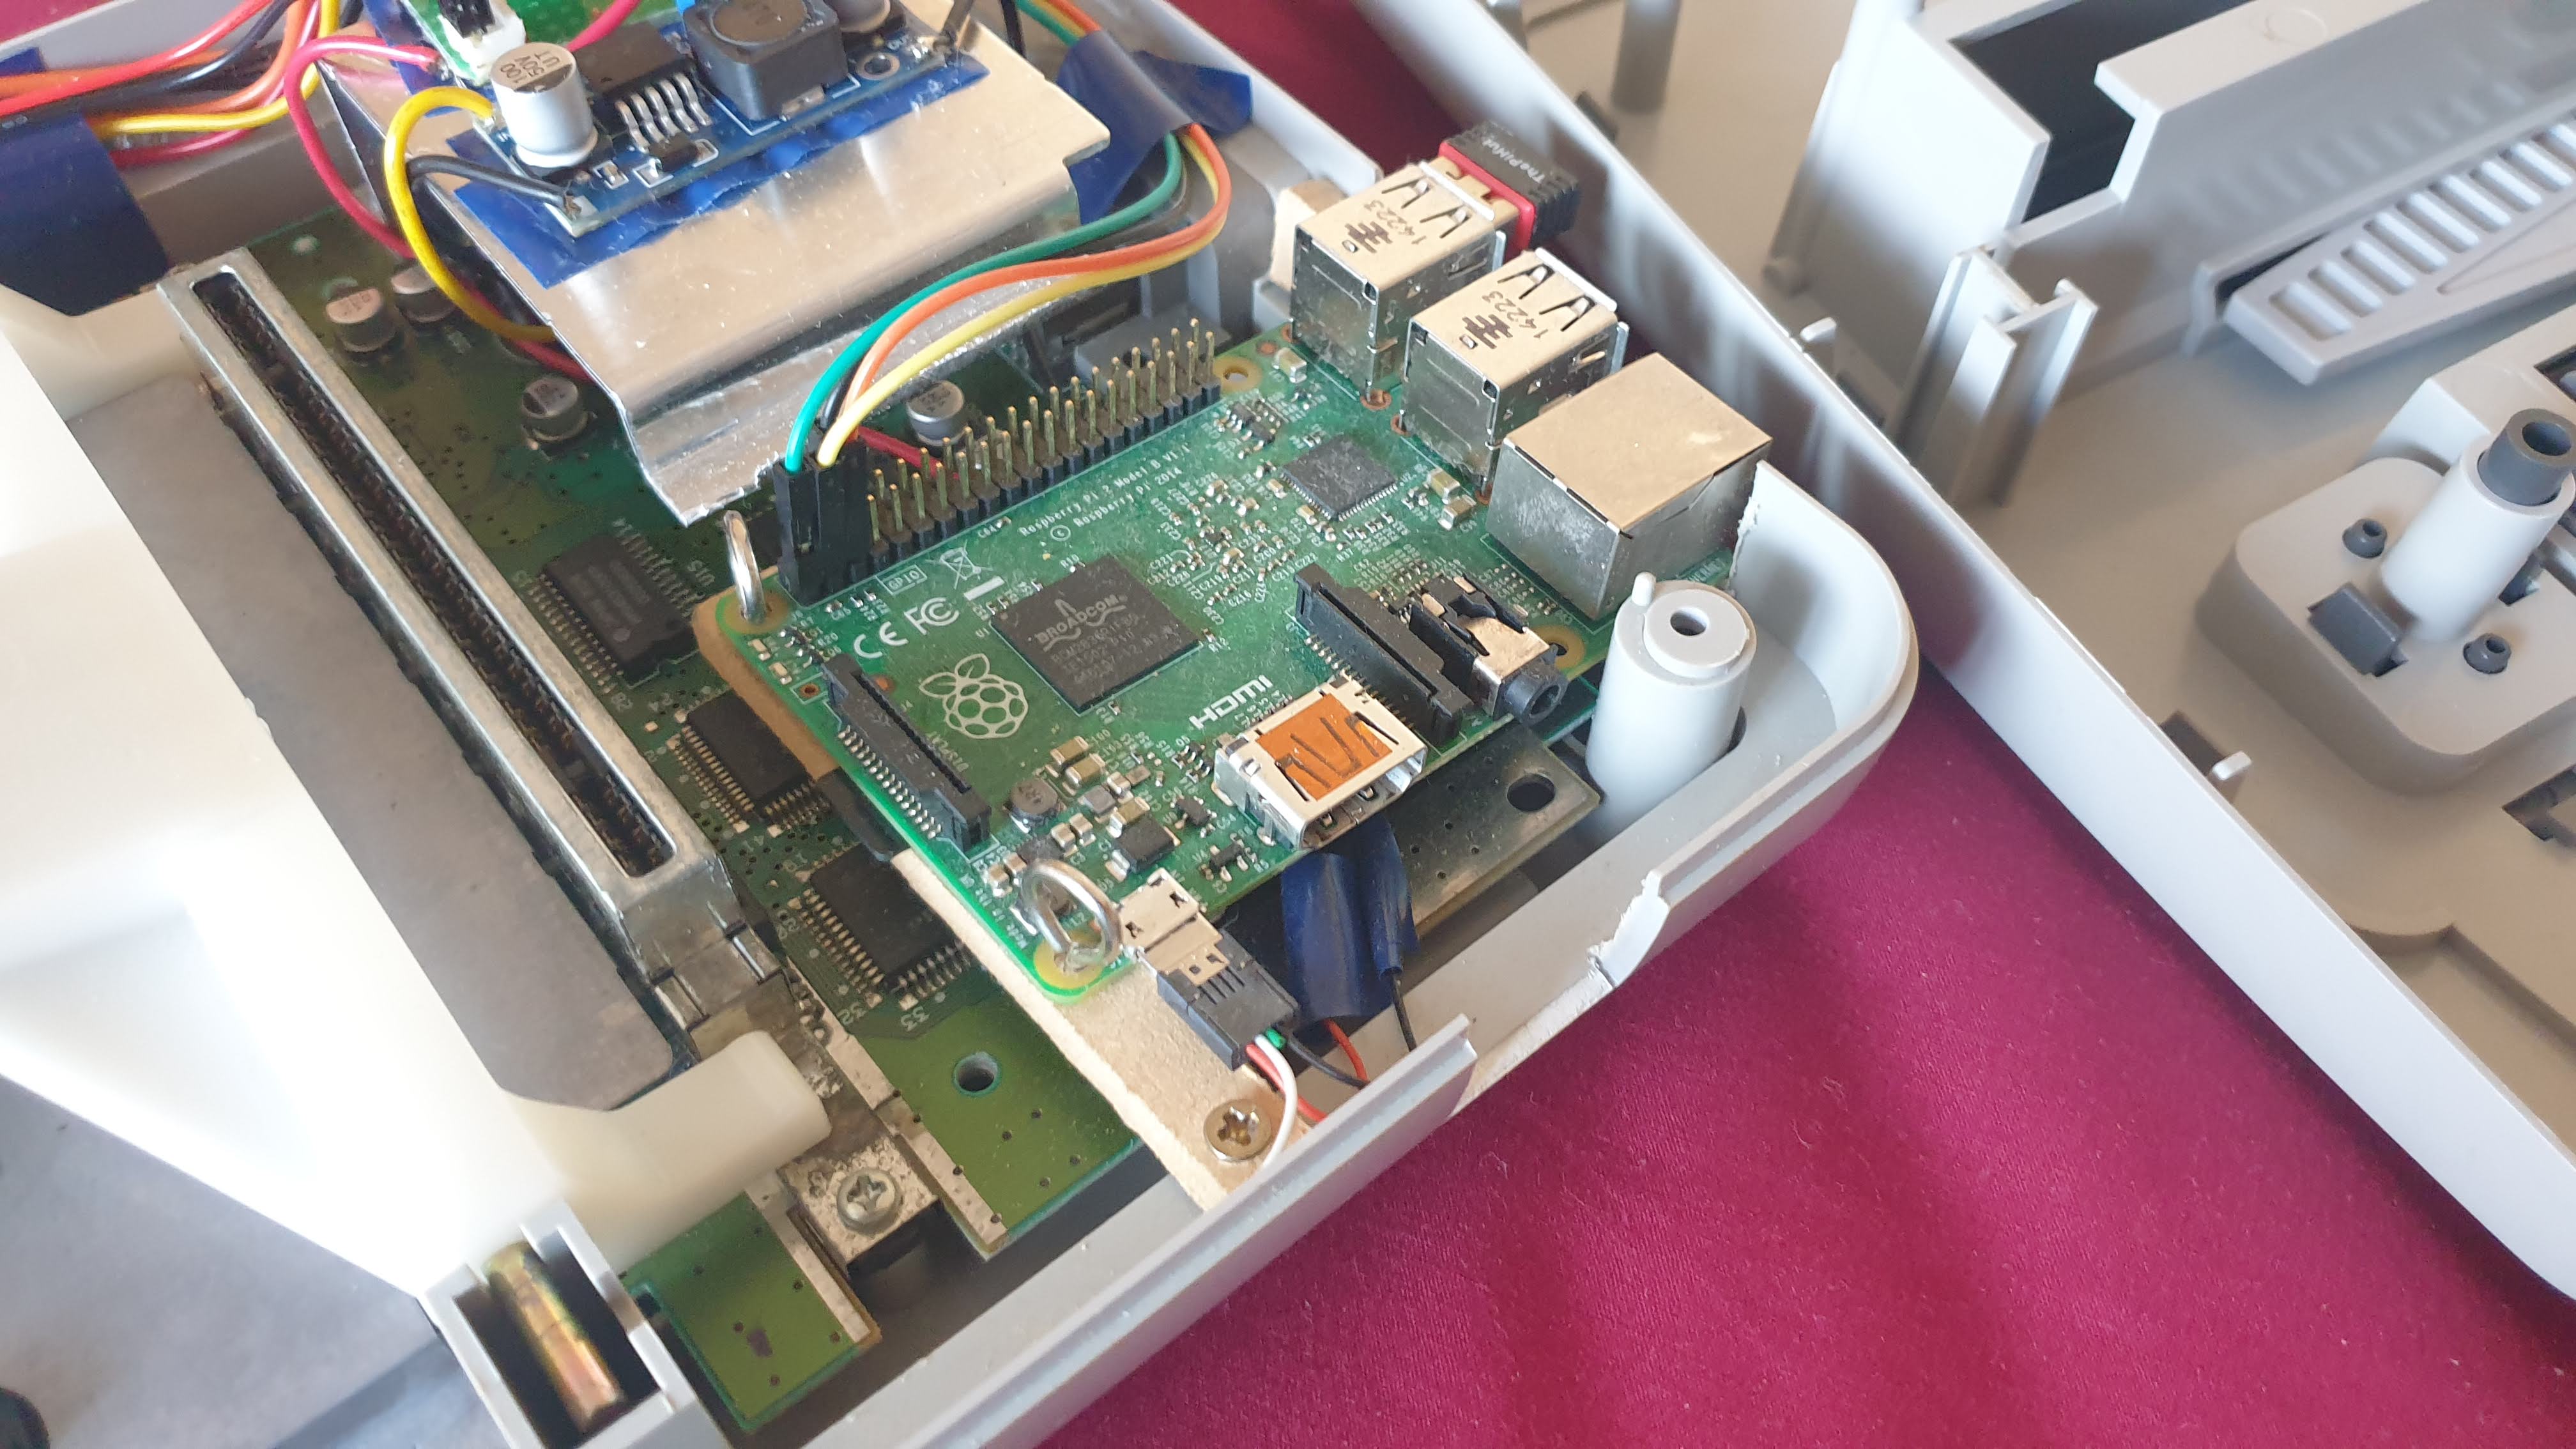 Picture of the Pi being screwed in?